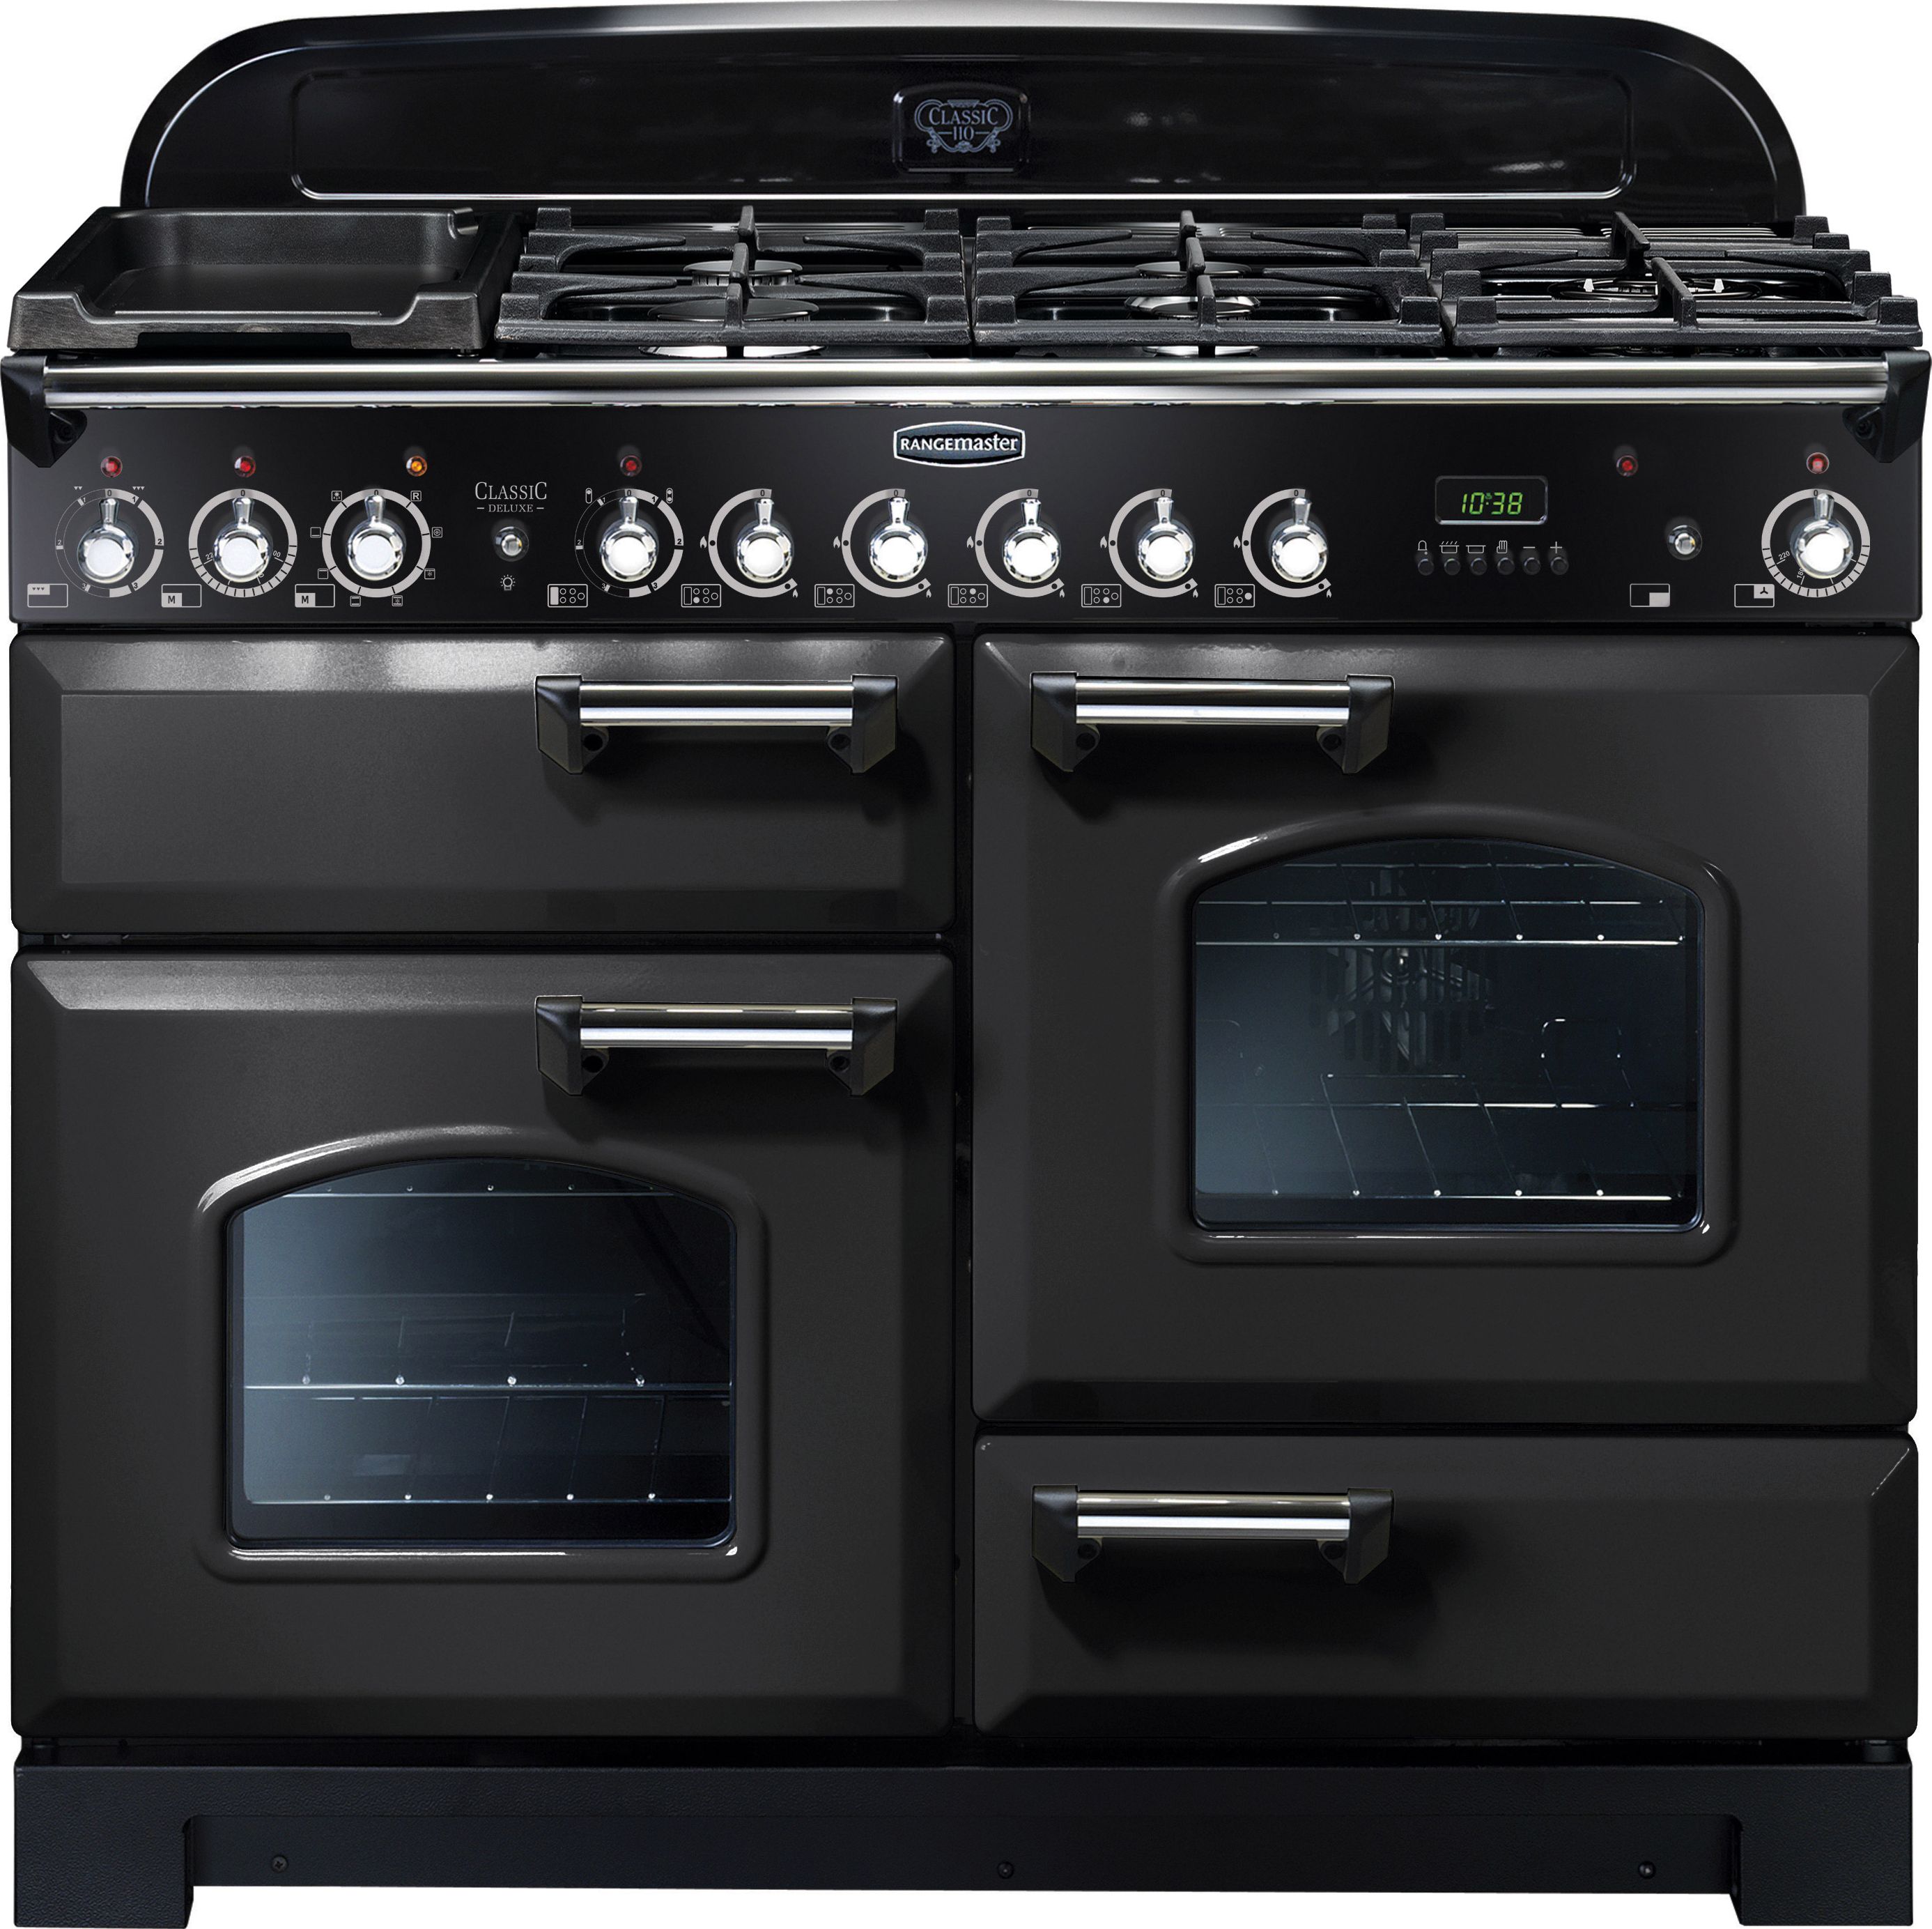 Rangemaster Classic Deluxe CDL110DFFCB/C 110cm Dual Fuel Range Cooker - Charcoal Black / Chrome - A/A Rated, Black